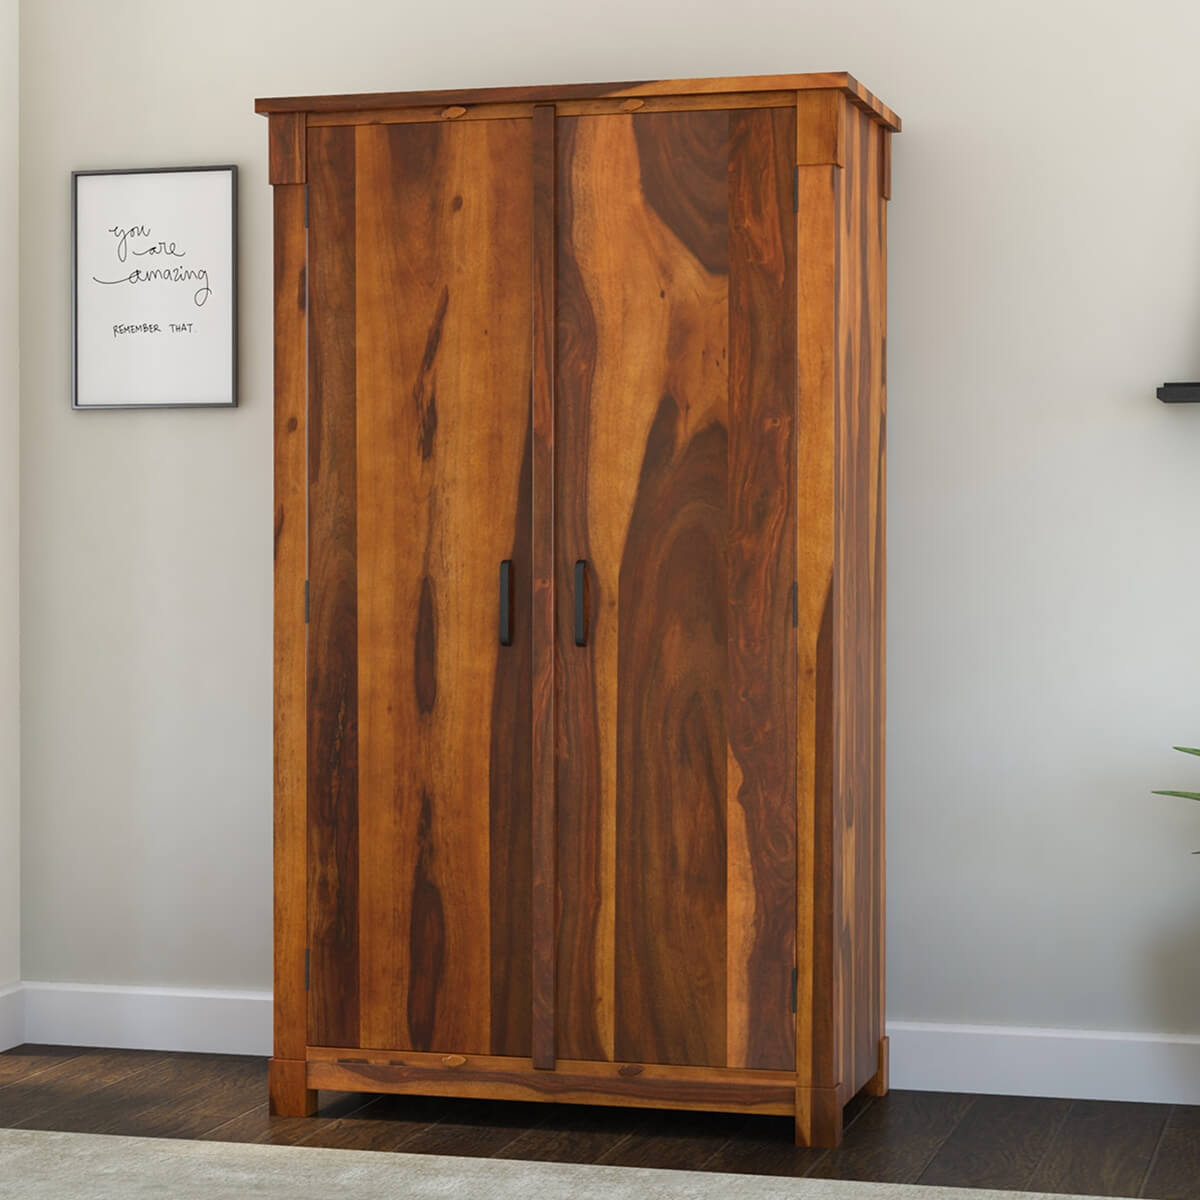 https://www.sierralivingconcepts.com/images/thumbs/0394222_modern-farmhouse-solid-wood-wardrobe-armoire-with-drawers-shelves.jpeg